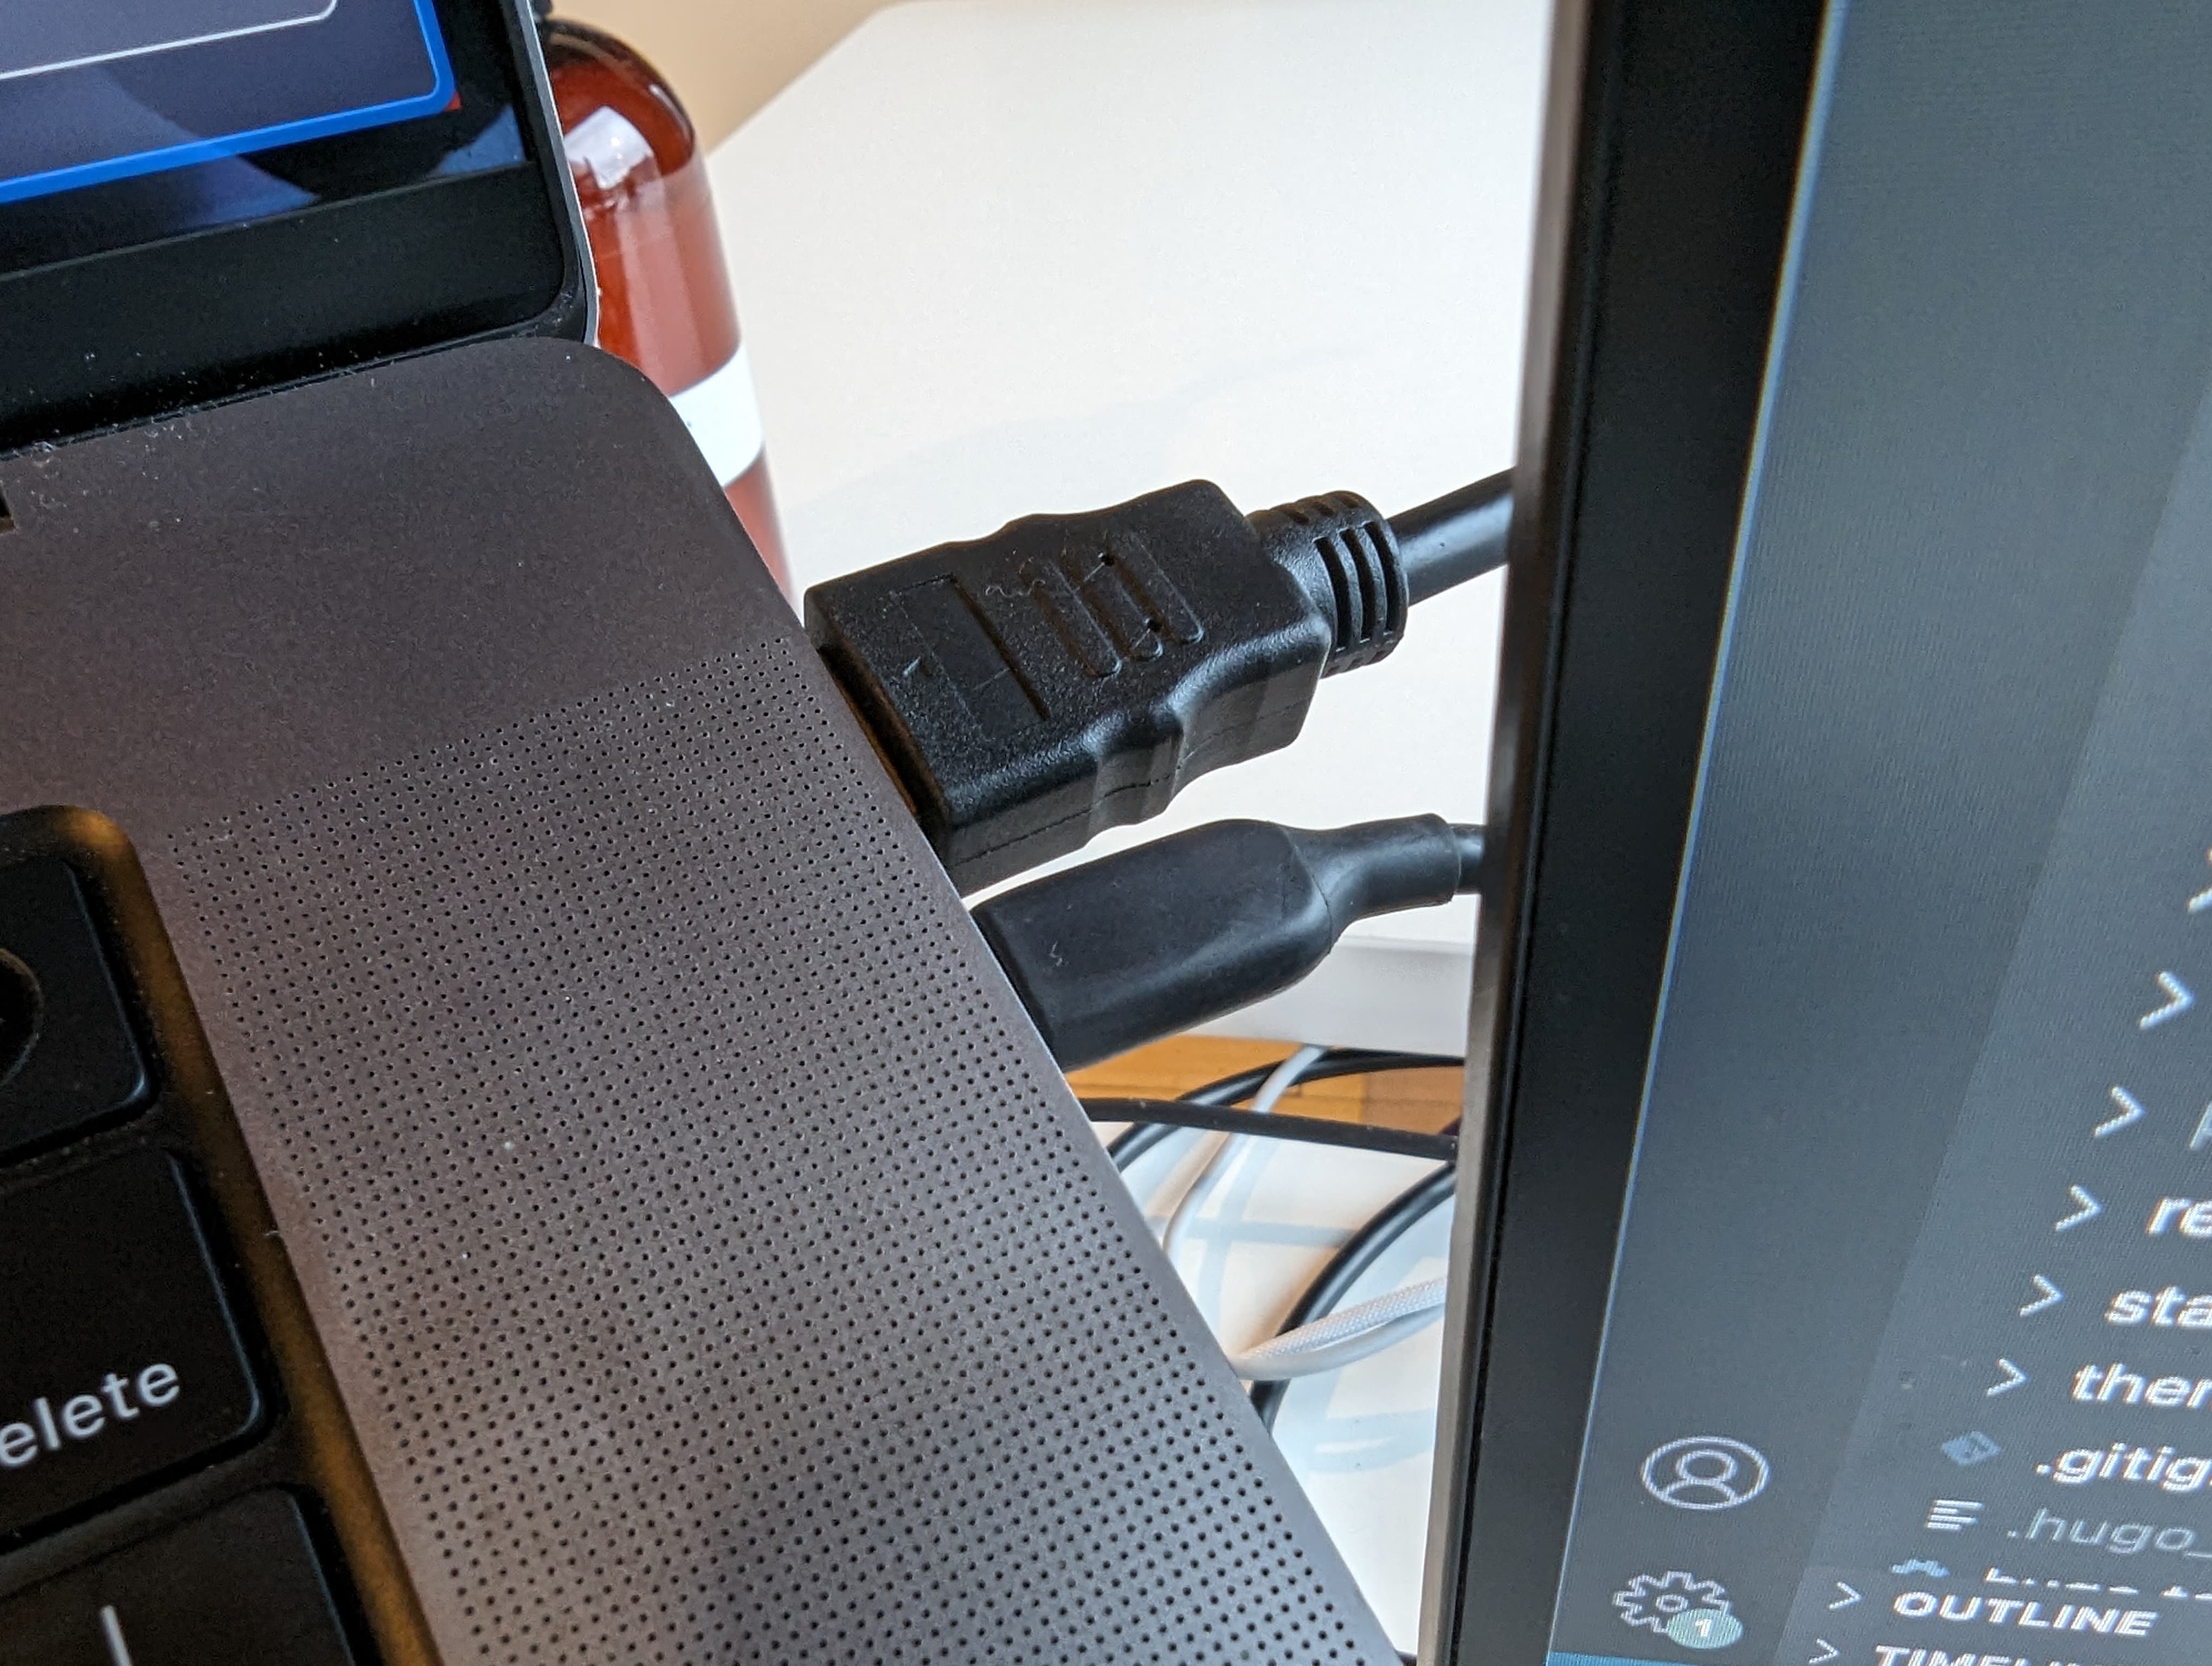 A close-up photograph of a black USB-C cable and a black HDMI cable plugged into the upper right side of an M1 Macbook Pro side by side.  There is a small sliver of monitor with the file tree of VS Code open visible on the right side.